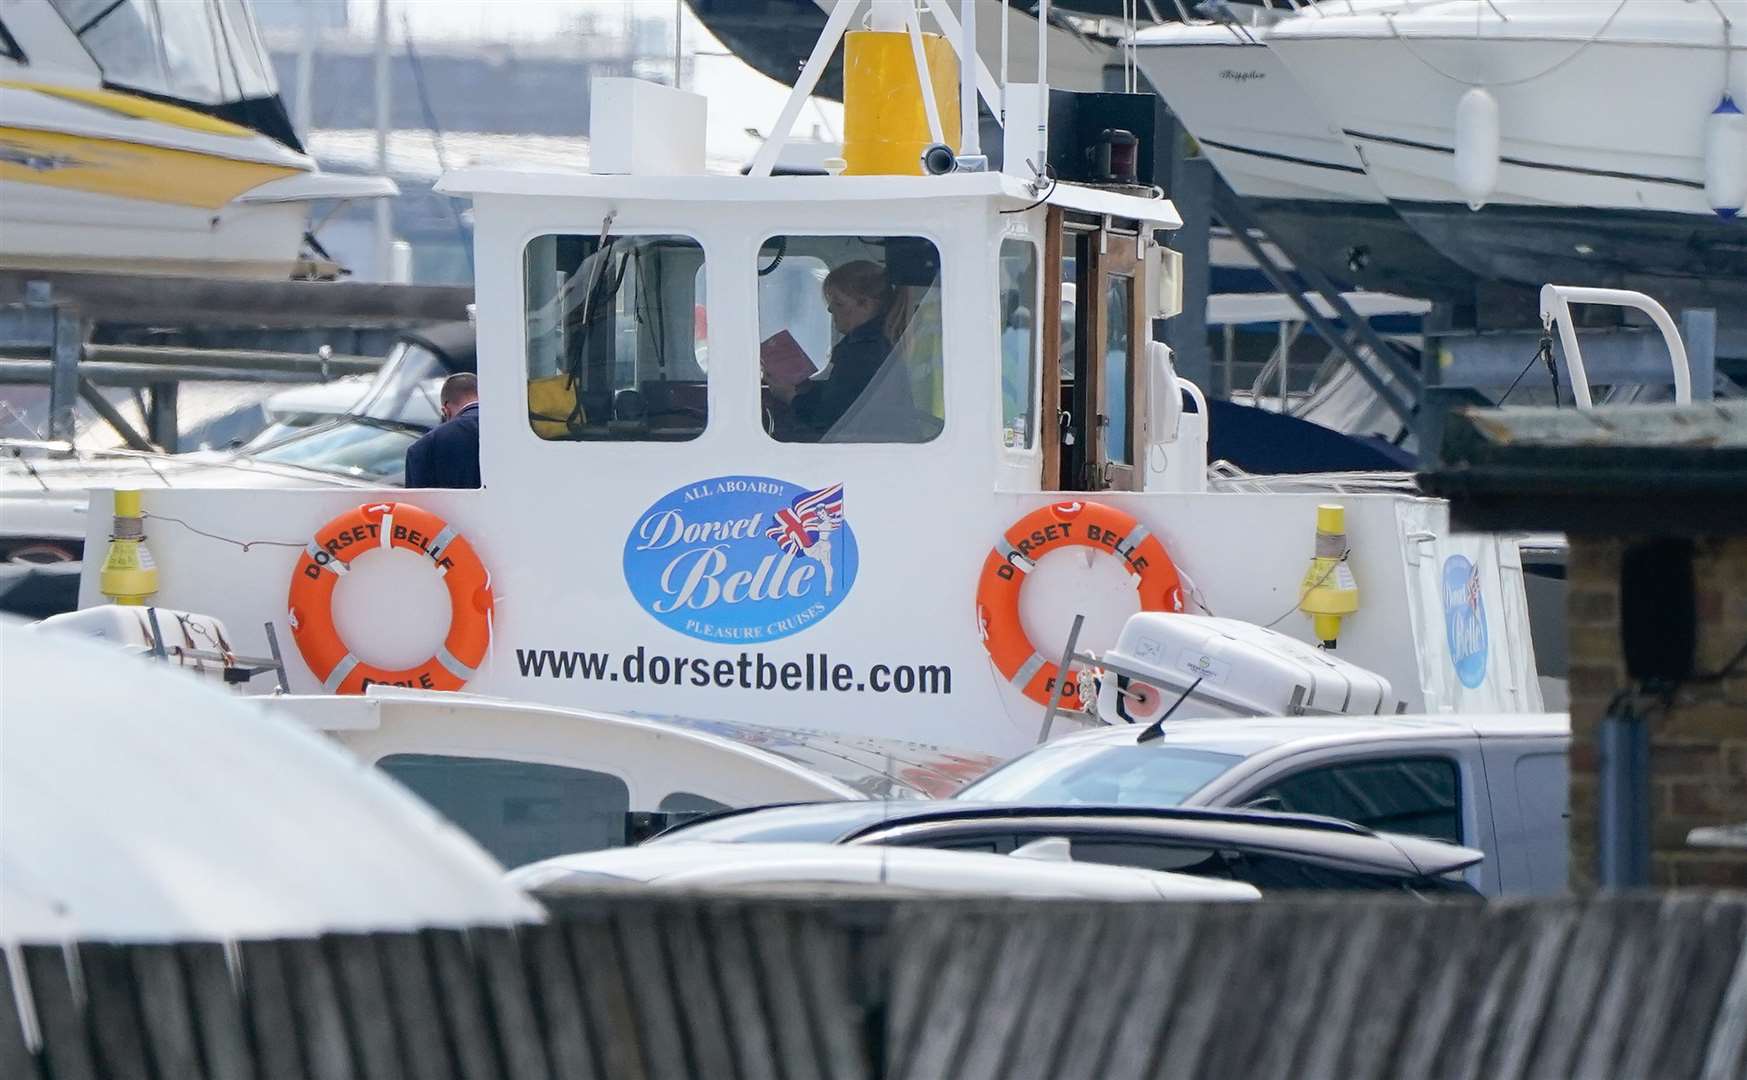 The pleasure cruiser Dorset Belle has been impounded following the incident (Andrew Matthews/PA)